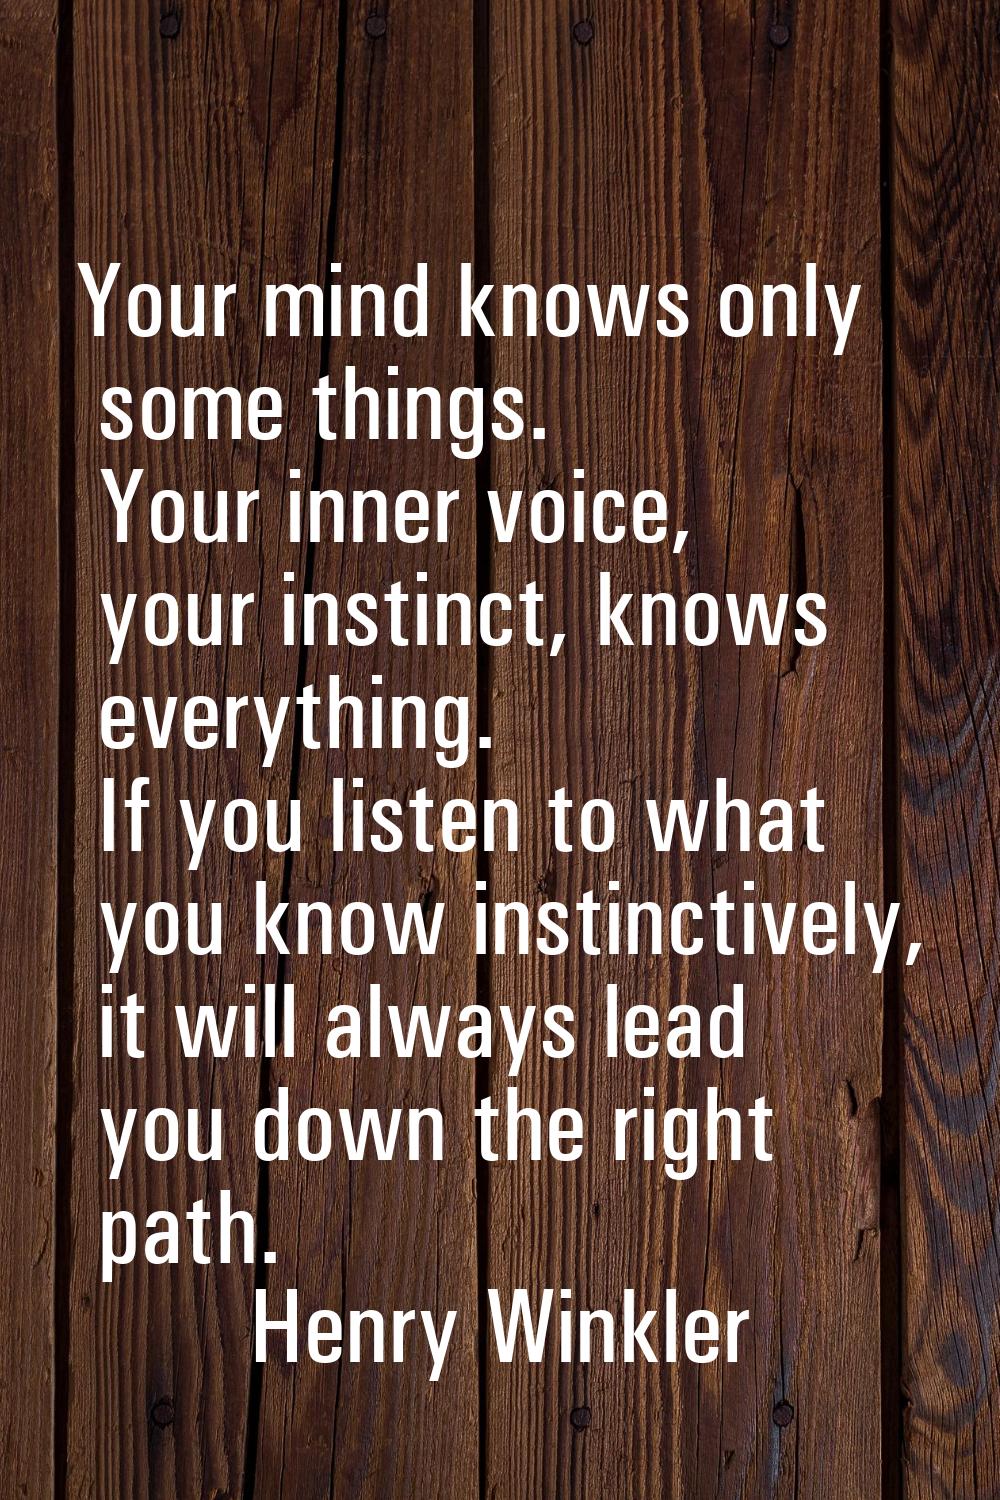 Your mind knows only some things. Your inner voice, your instinct, knows everything. If you listen 